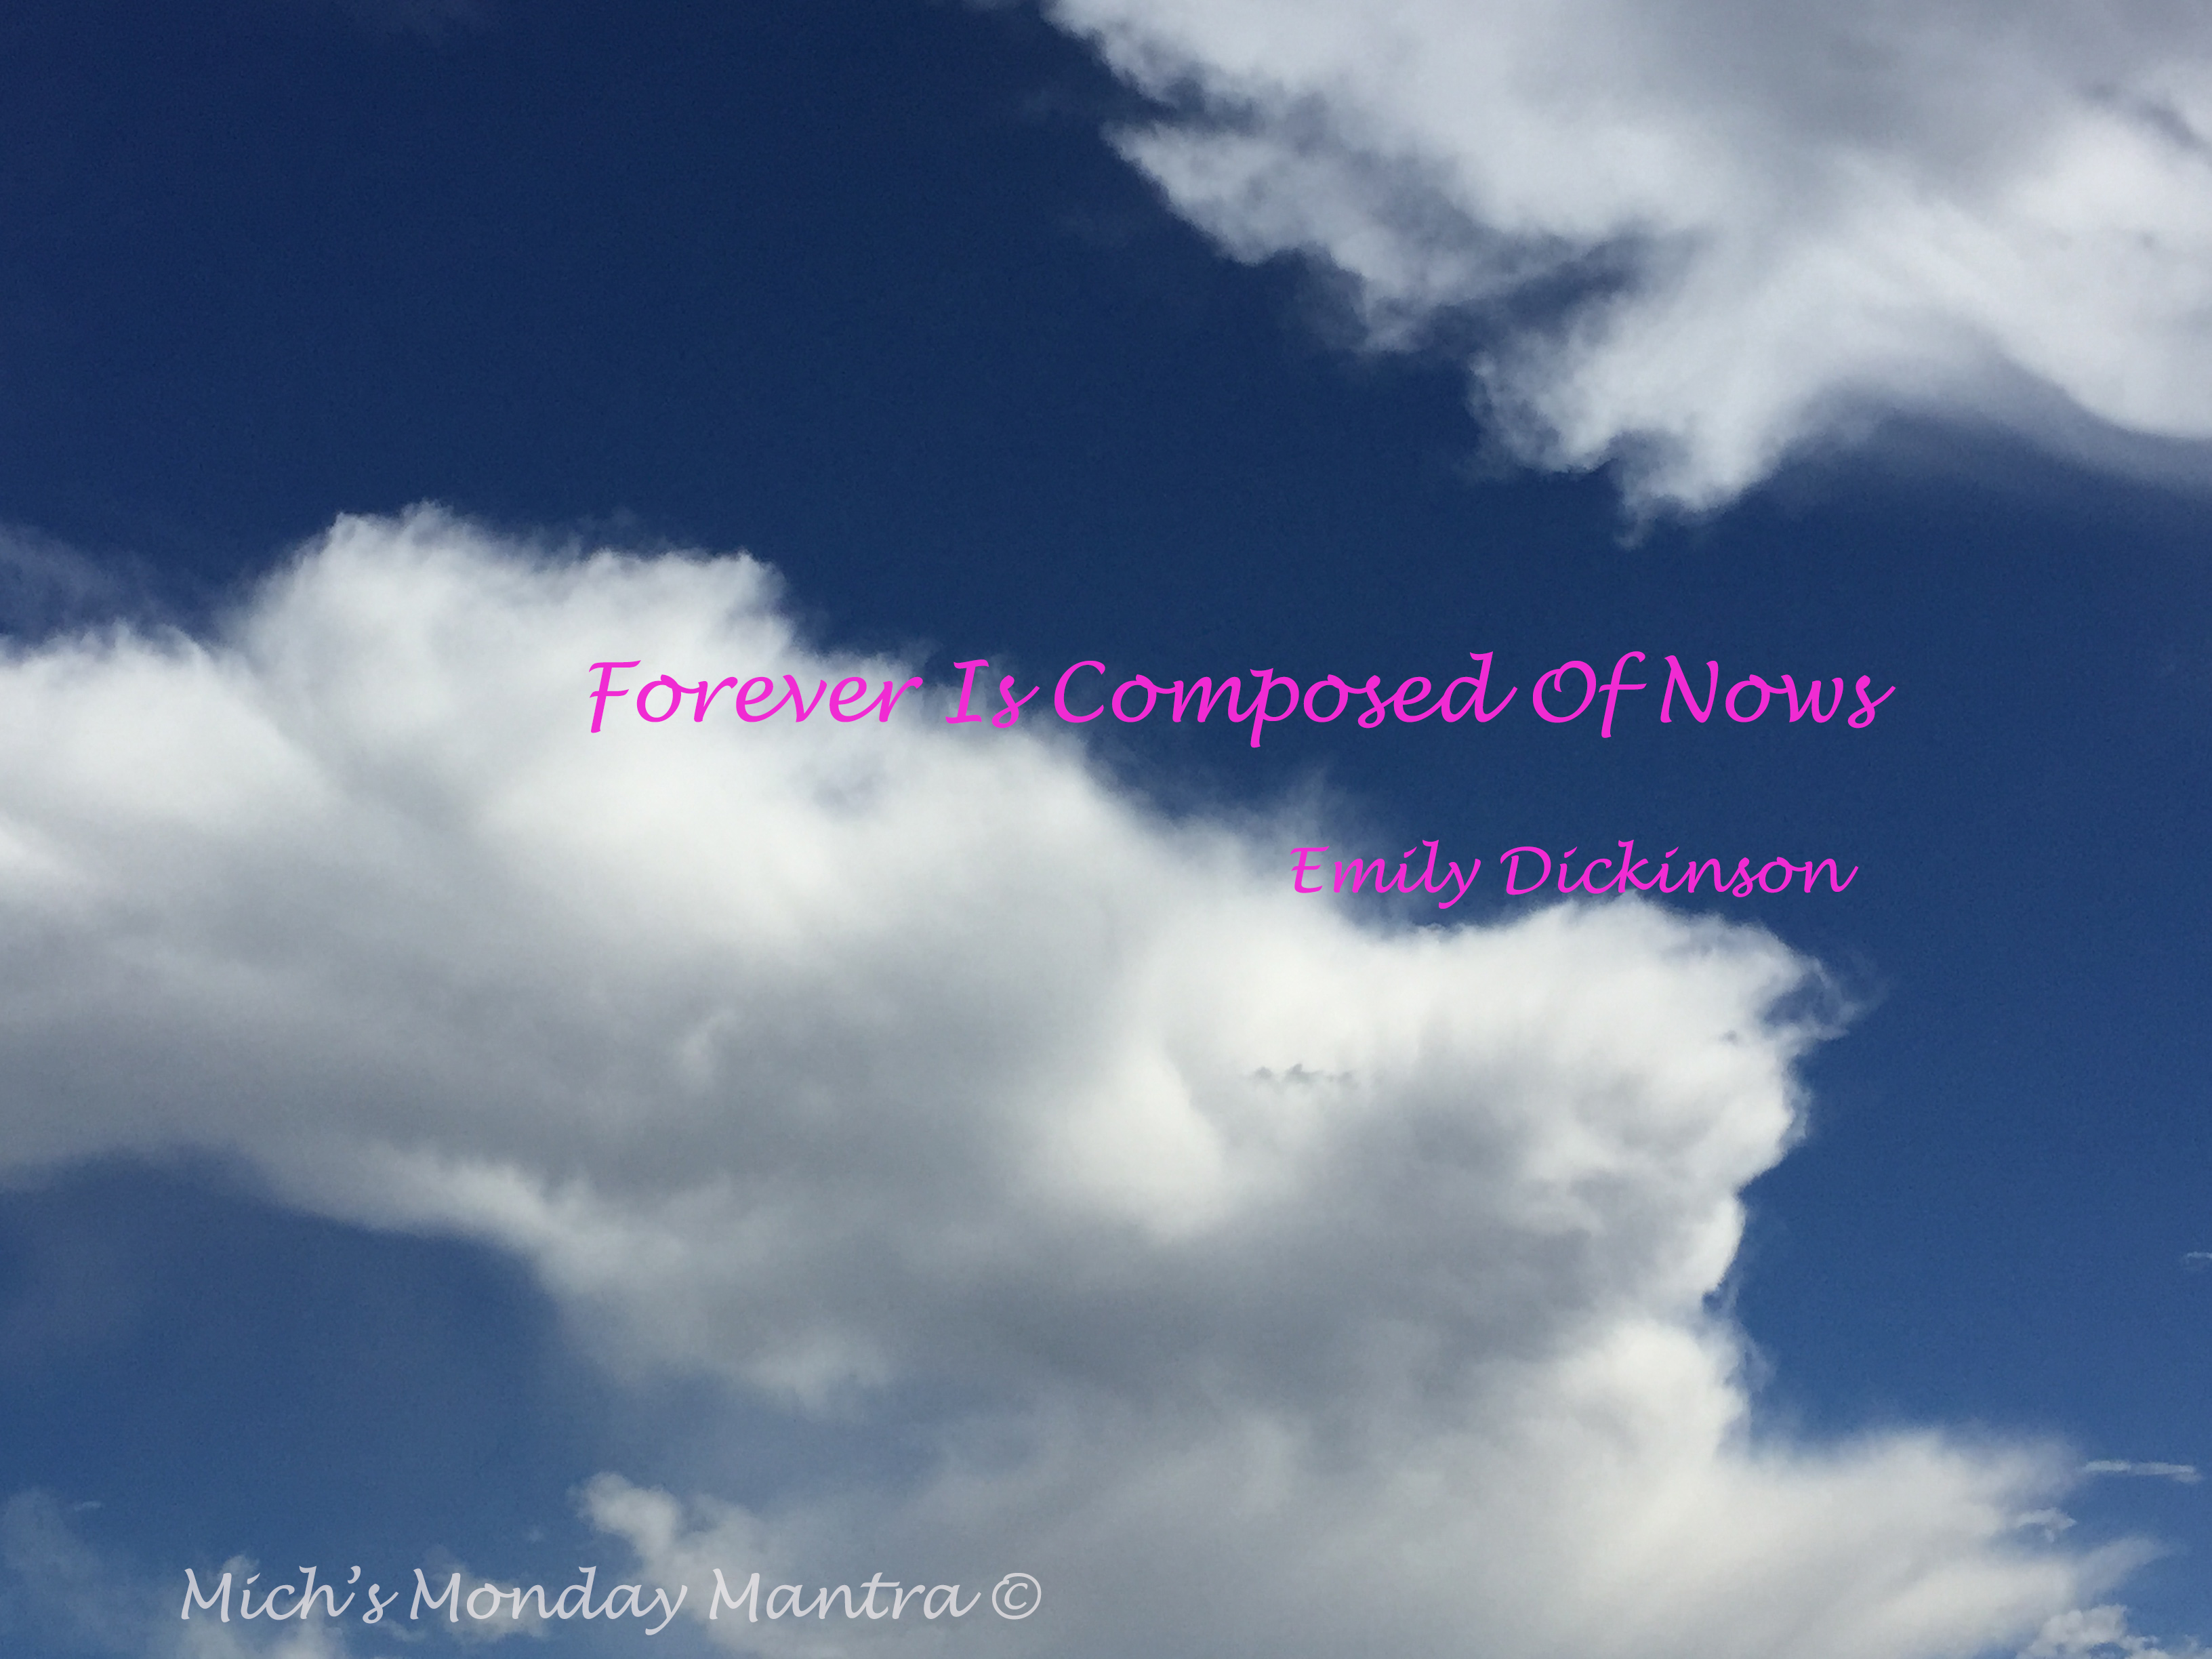 Mich’s Monday Mantra “Forever is Composed of Nows”